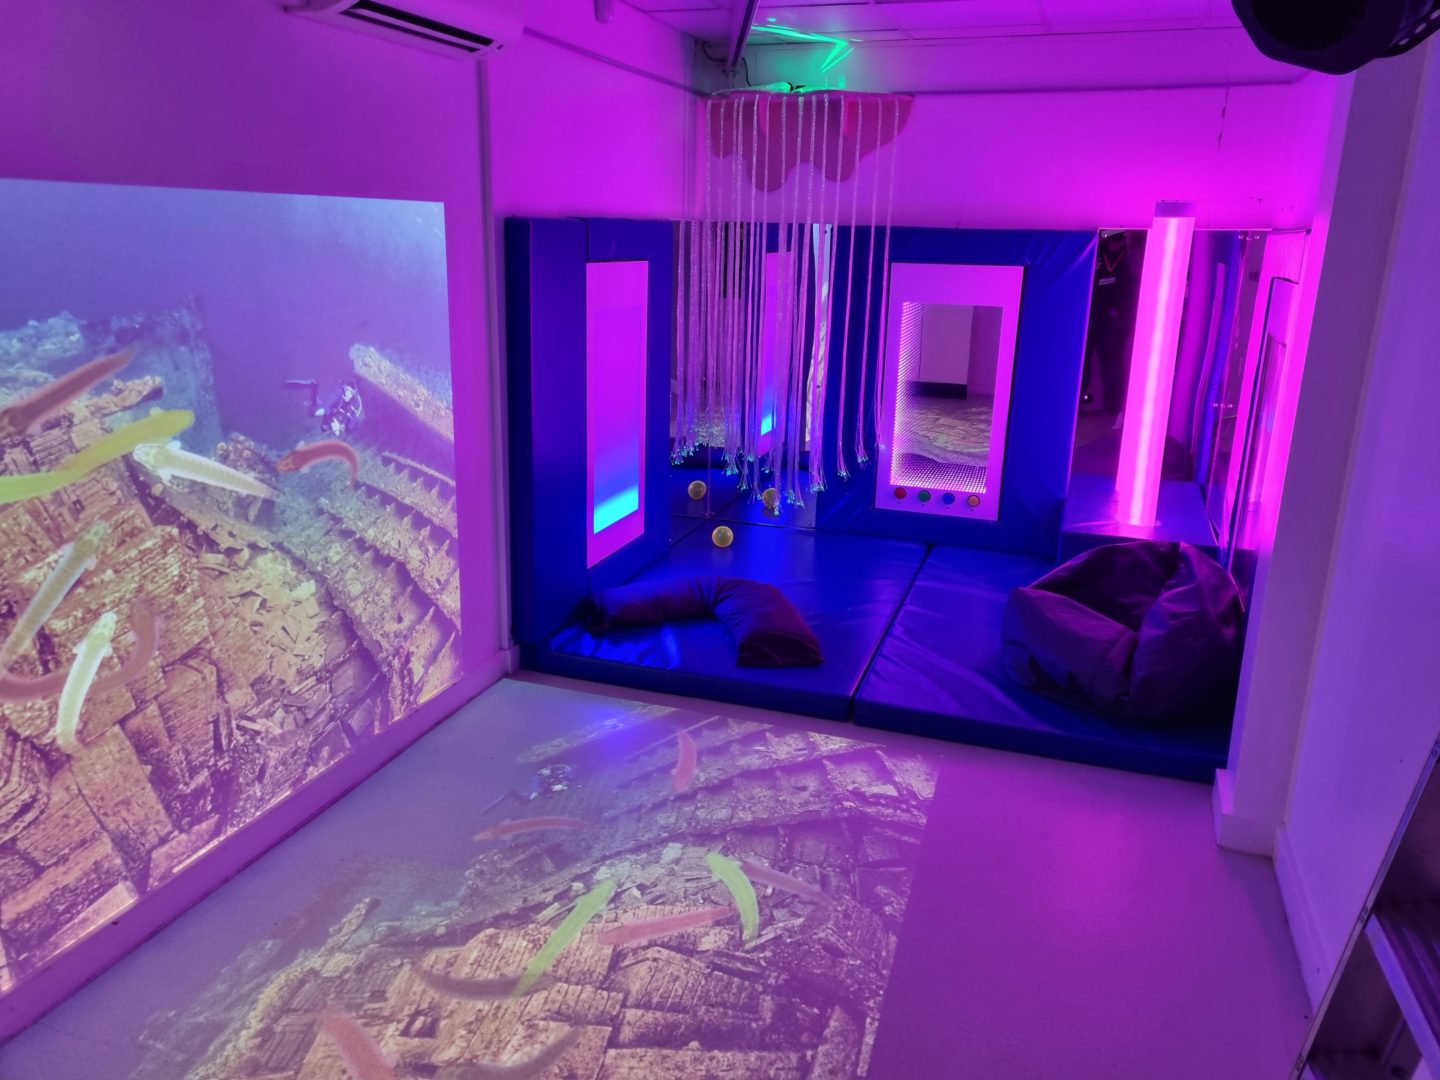 fully interactive immersive room including 1 interactive wall, 1 interactive corner. perfectly matched with a soft padded snug incorporating a range of DMX sensory stimulation hardware